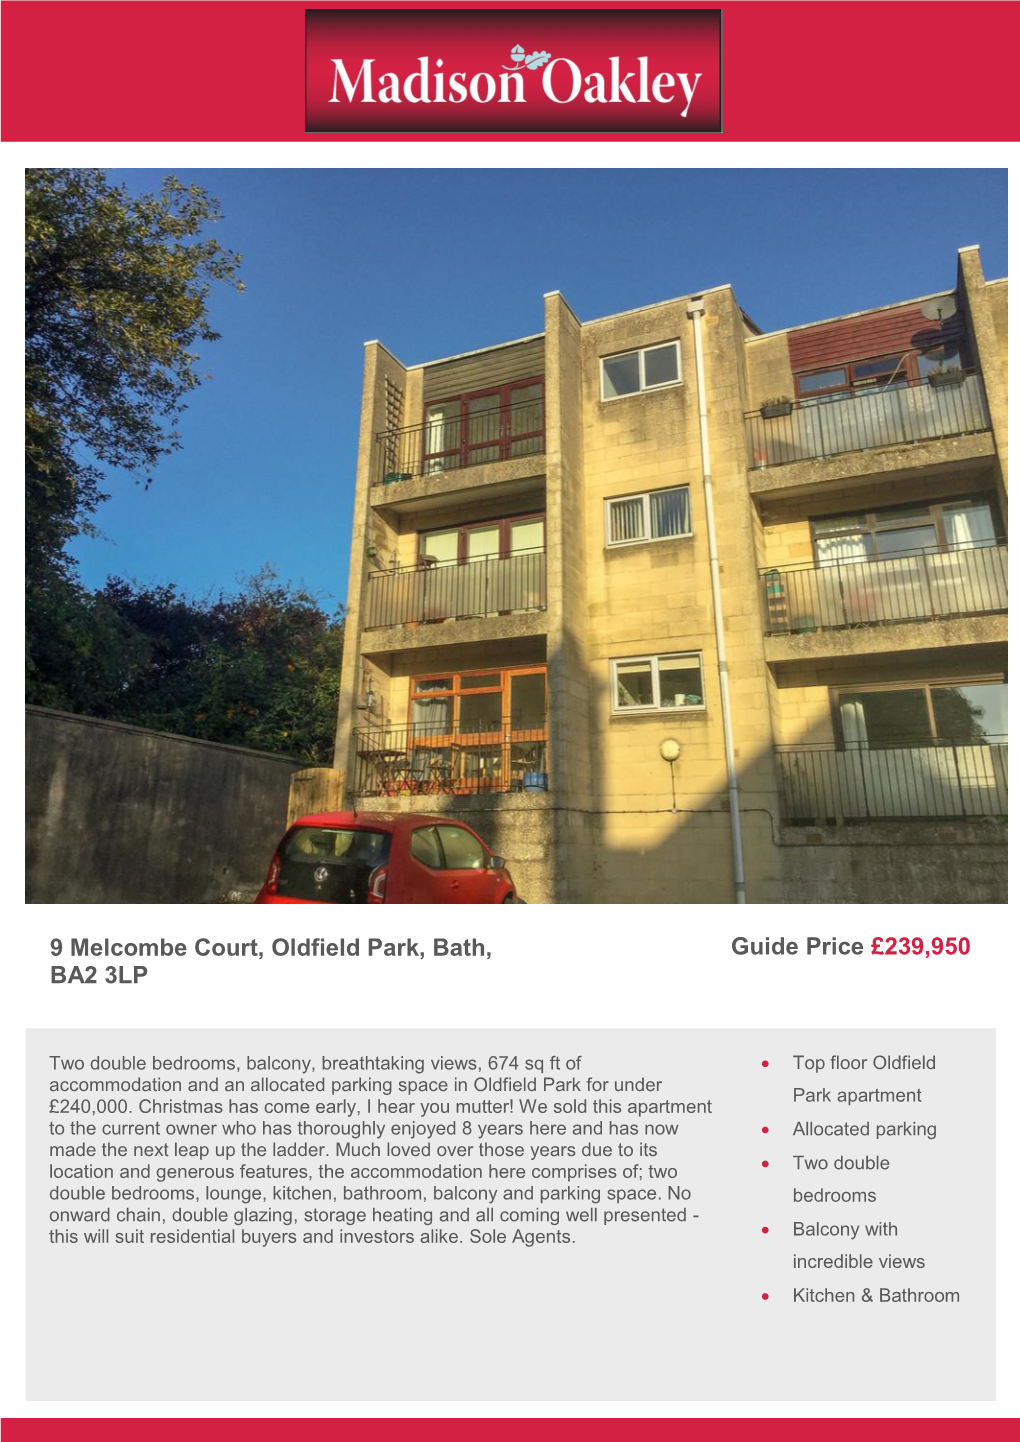 9 Melcombe Court, Oldfield Park, Bath, BA2 3LP Guide Price £239,950